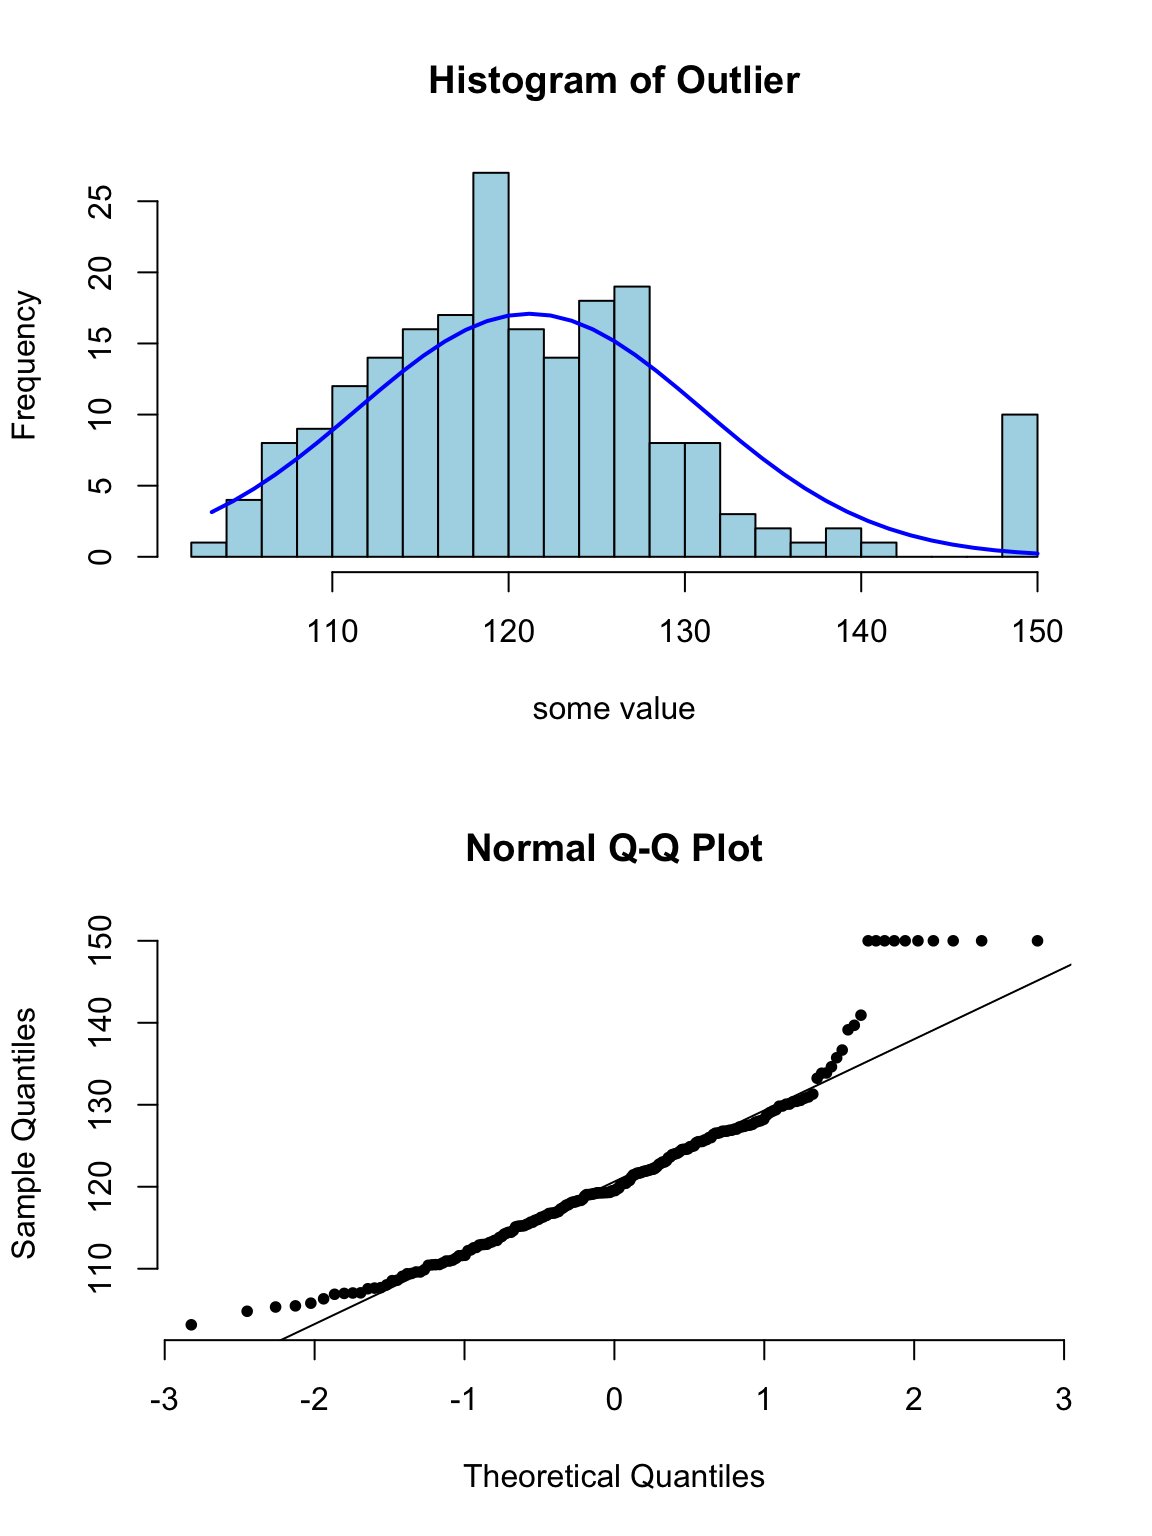 Appearance of histogram and normal plot for a variable with outlying values